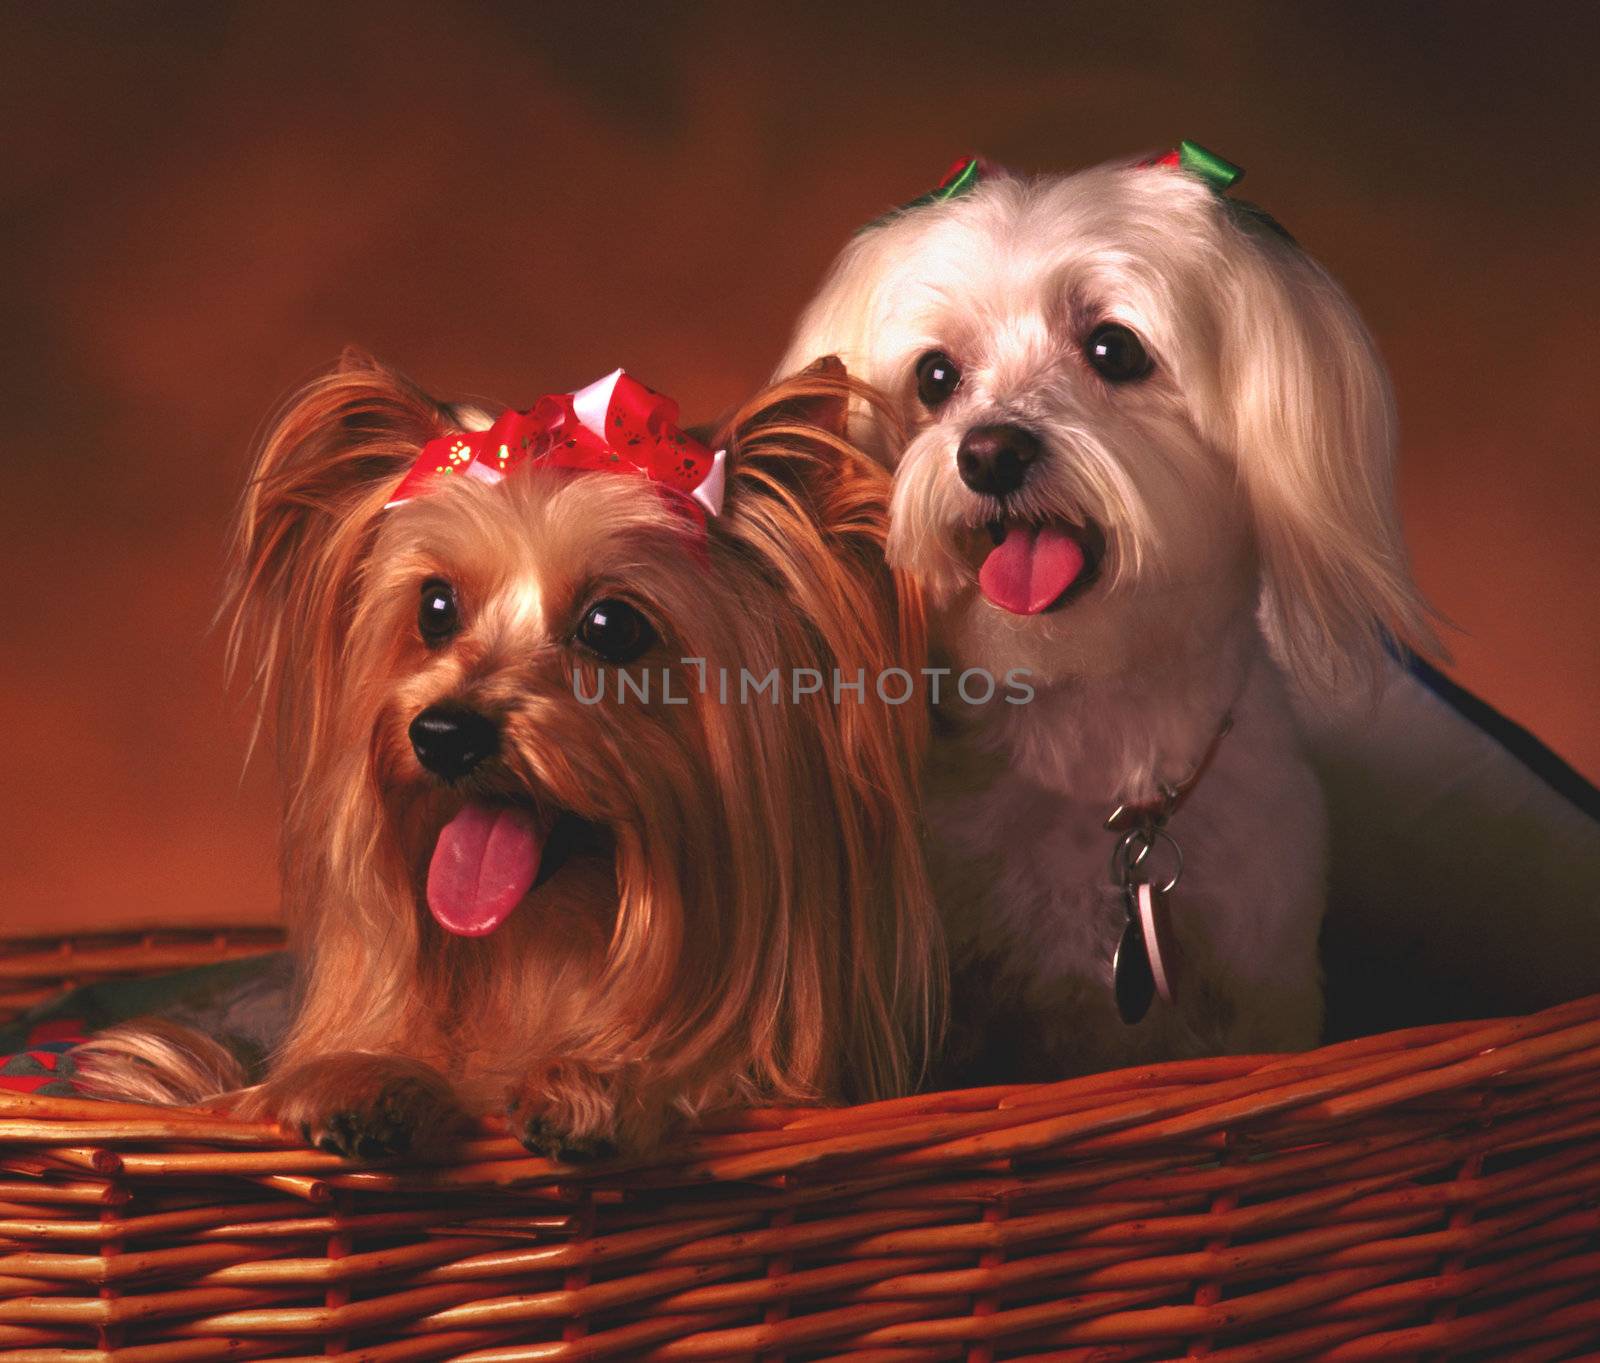 portrait of two dogs in basket by hotflash2001